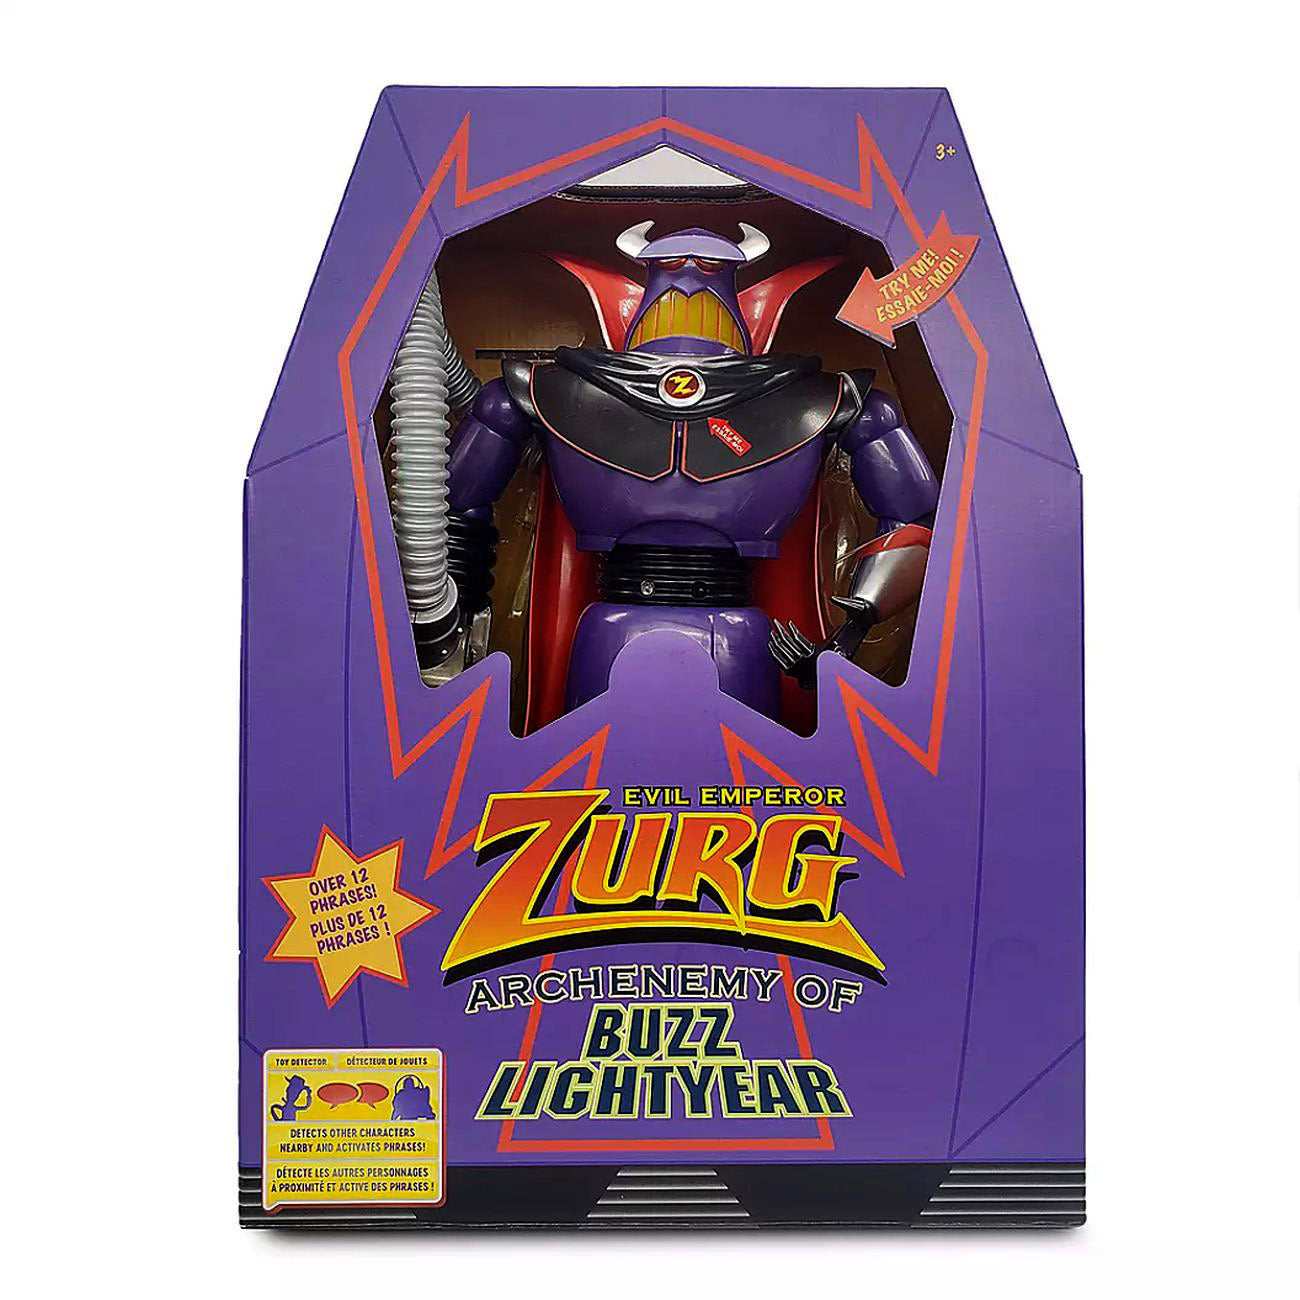 Toy Story Interactive Talking Action Figure - Evil Emperor Zurg